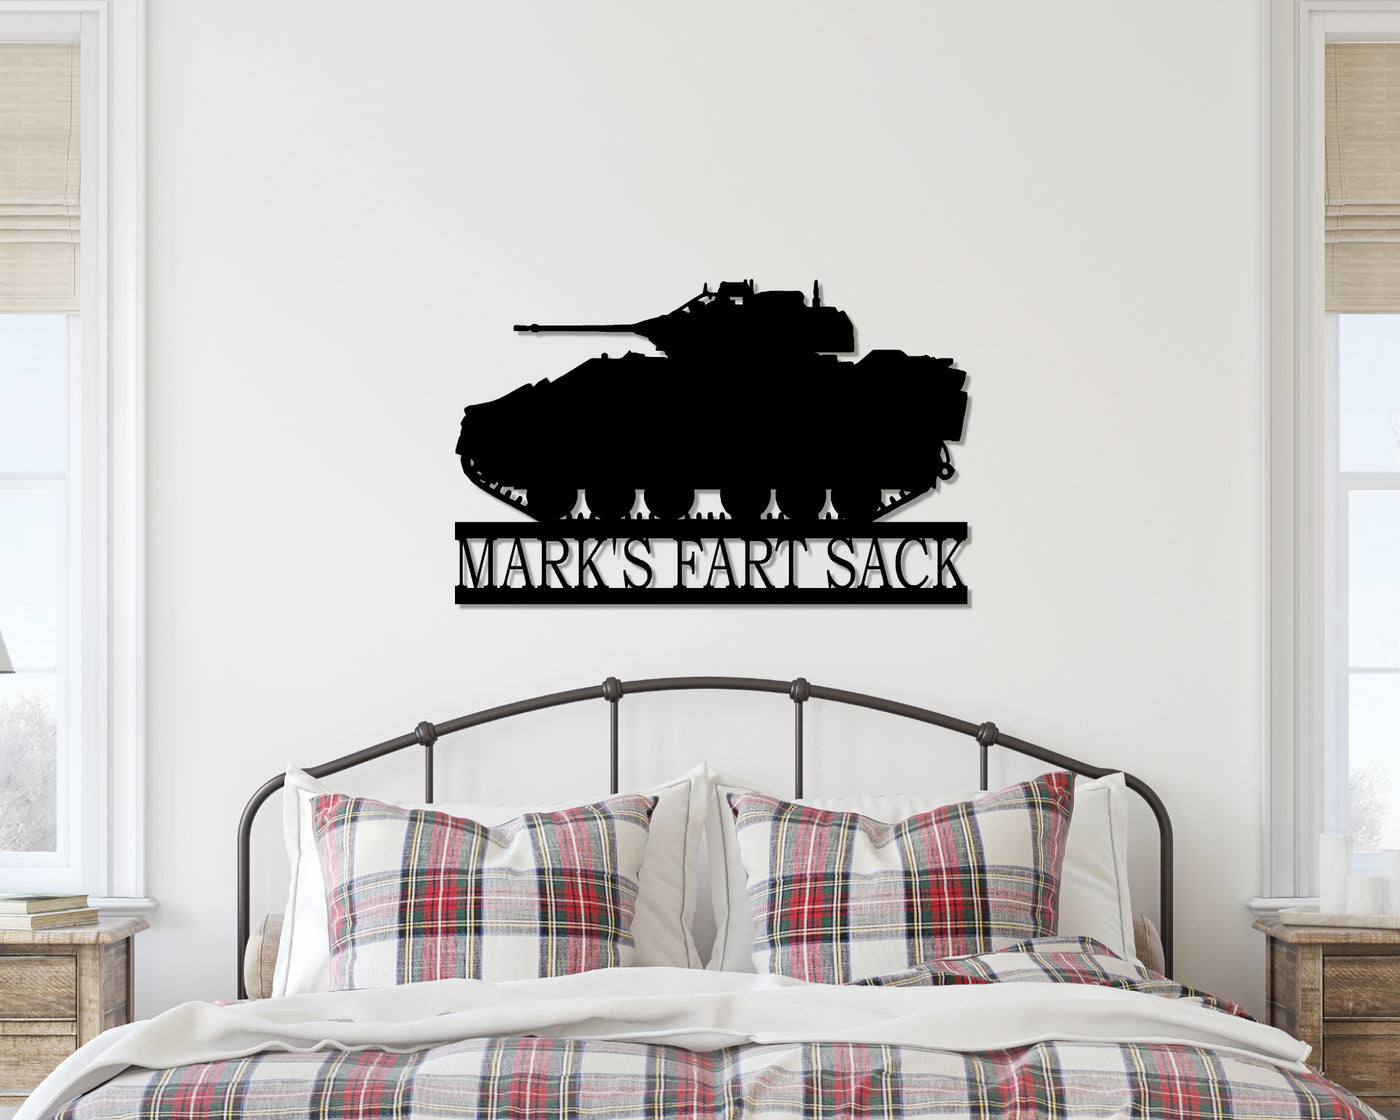 Personalized M3 Bradley Tank Metal Sign - Madison Iron and Wood - Personalized sign - metal outdoor decor - Steel deocrations - american made products - veteran owned business products - fencing decorations - fencing supplies - custom wall decorations - personalized wall signs - steel - decorative post caps - steel post caps - metal post caps - brackets - structural brackets - home improvement - easter - easter decorations - easter gift - easter yard decor